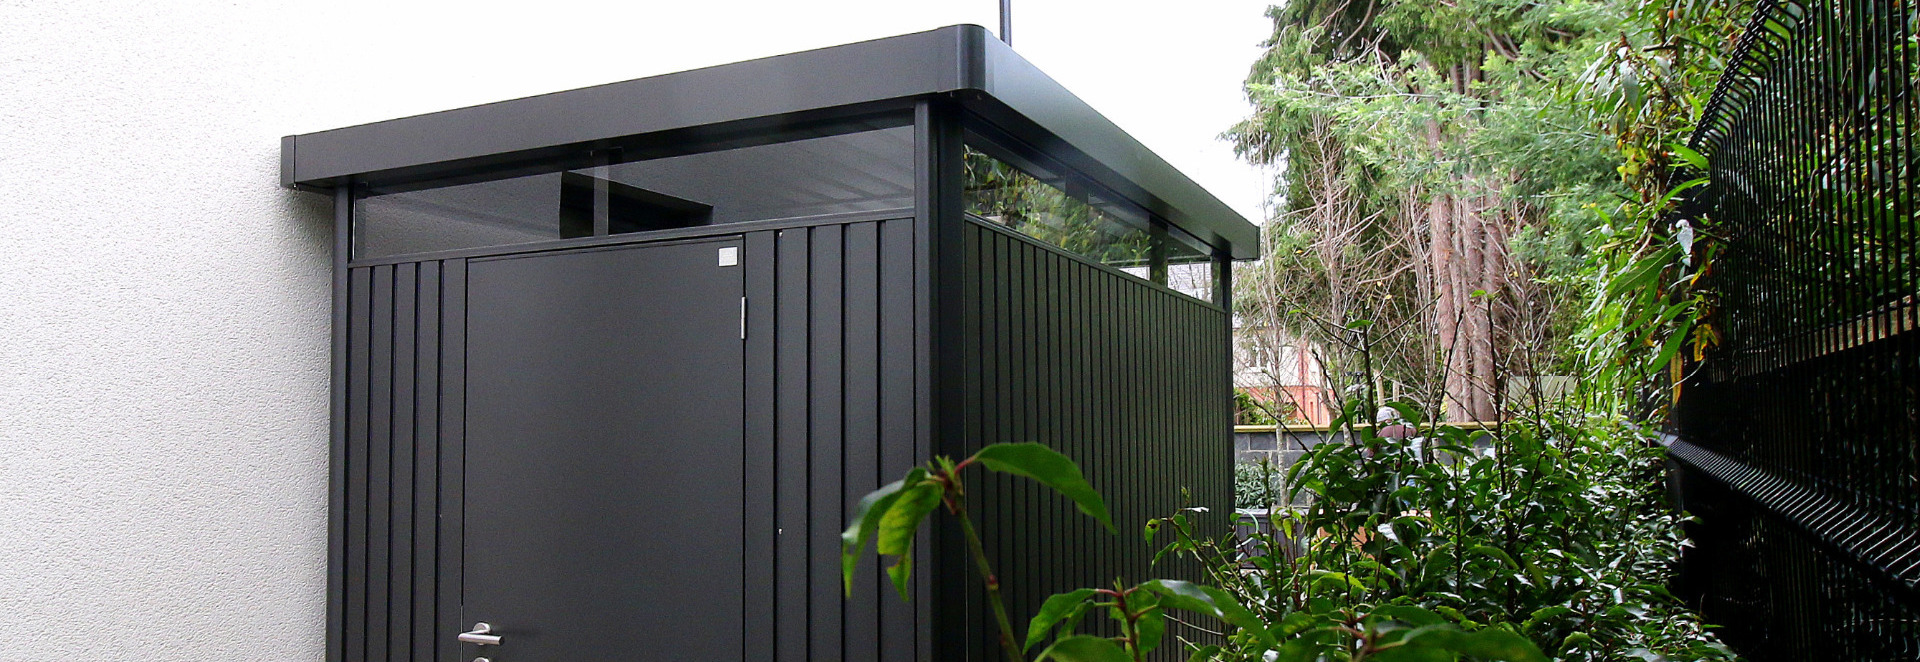 Biohort HighLine Steel Garden Shed installed in Foxrock, Dublin 18 | Supplied + Fitted by Owen Chubb Landscapers - First for Biohort